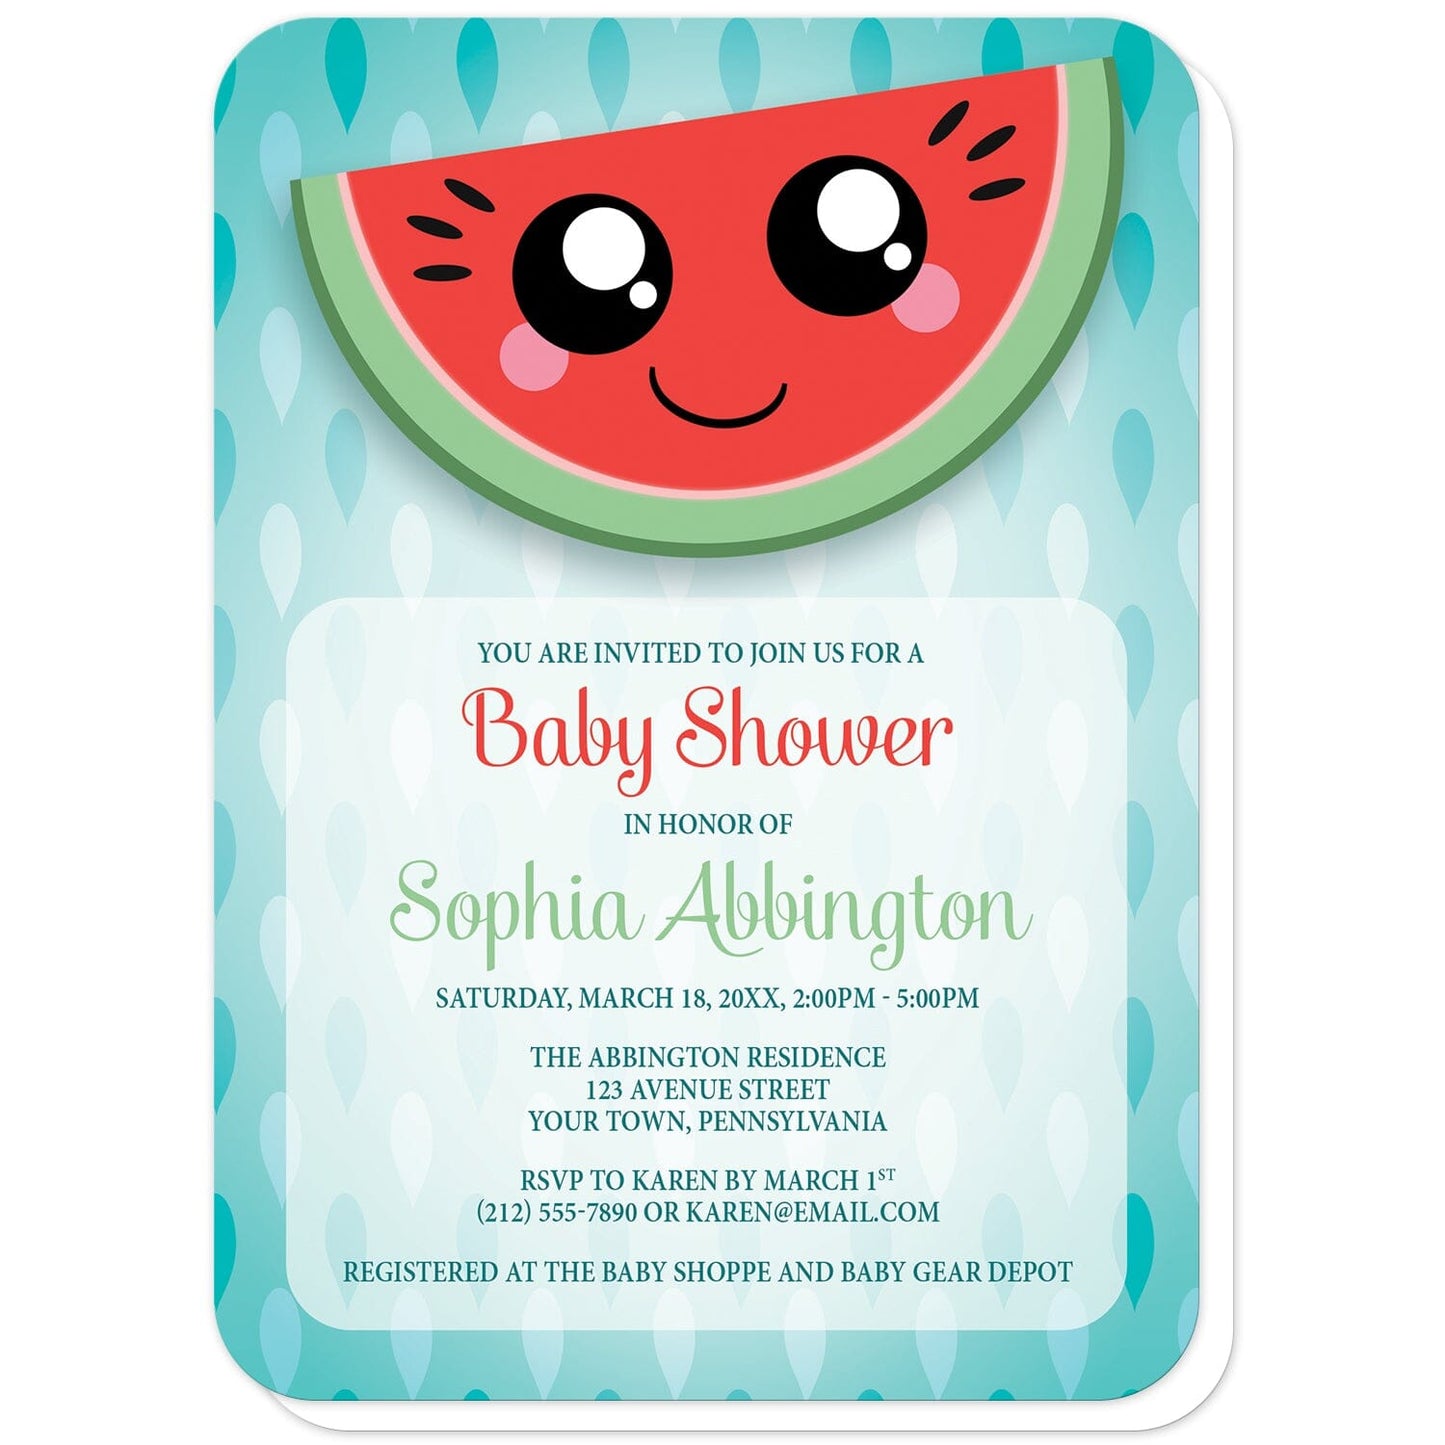 Smiling Watermelon Slice Baby Shower Invitations (with rounded corners) at Artistically Invited. Cute smiling watermelon slice baby shower invitations with a happy and smiling Kawaii-style red and green watermelon slice over a turquoise seed pattern background. The personalized information you provide for your baby shower celebration will be custom printed in red, green, and dark turquoise over a lightened frame area over the seeds pattern below the watermelon slice.